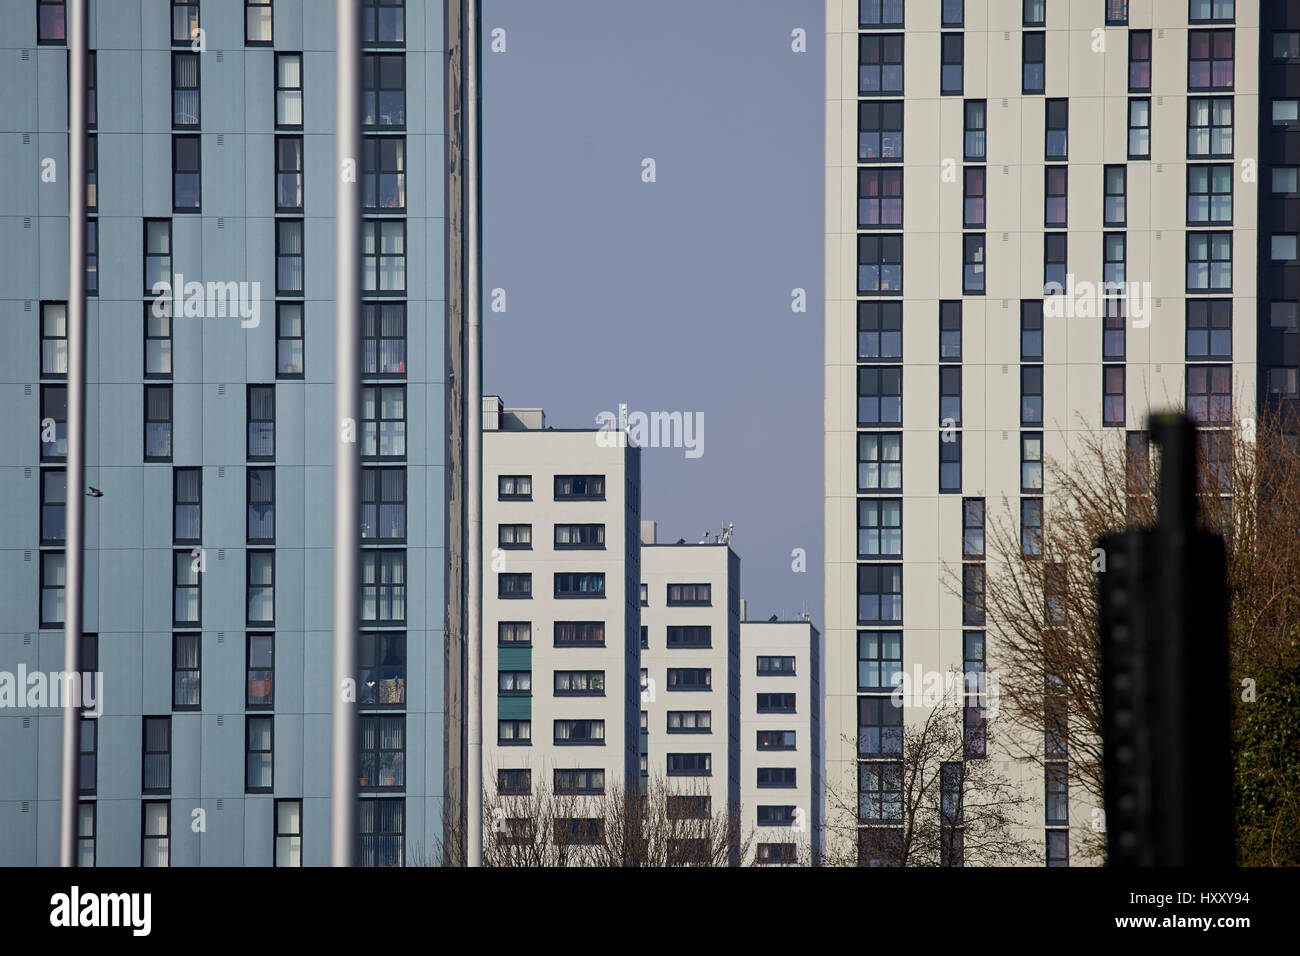 Pendeleton flats, modernised and covered in stylish cladding Salford. Gtr Manchester, England, UK . Stock Photo